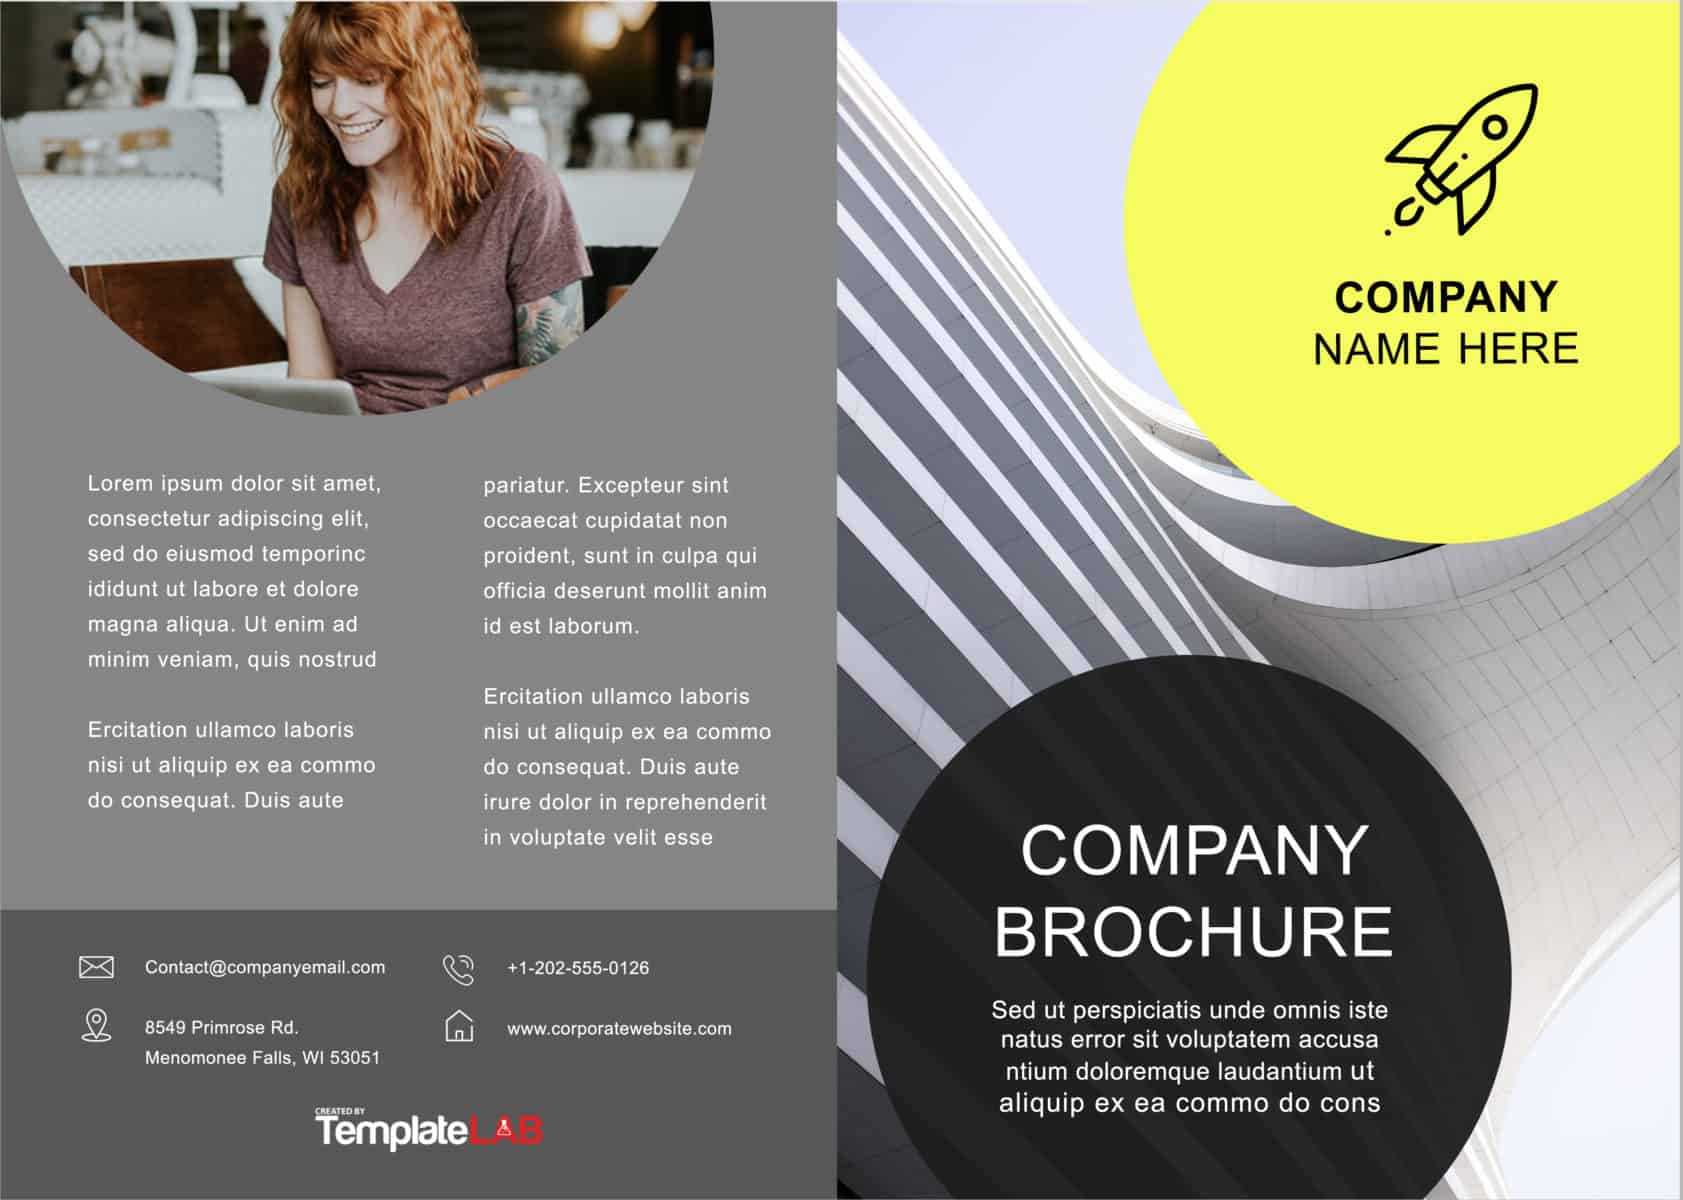 Brochure Design Templates Free Download Word - Veppe Pertaining To Microsoft Word Brochure Template Free